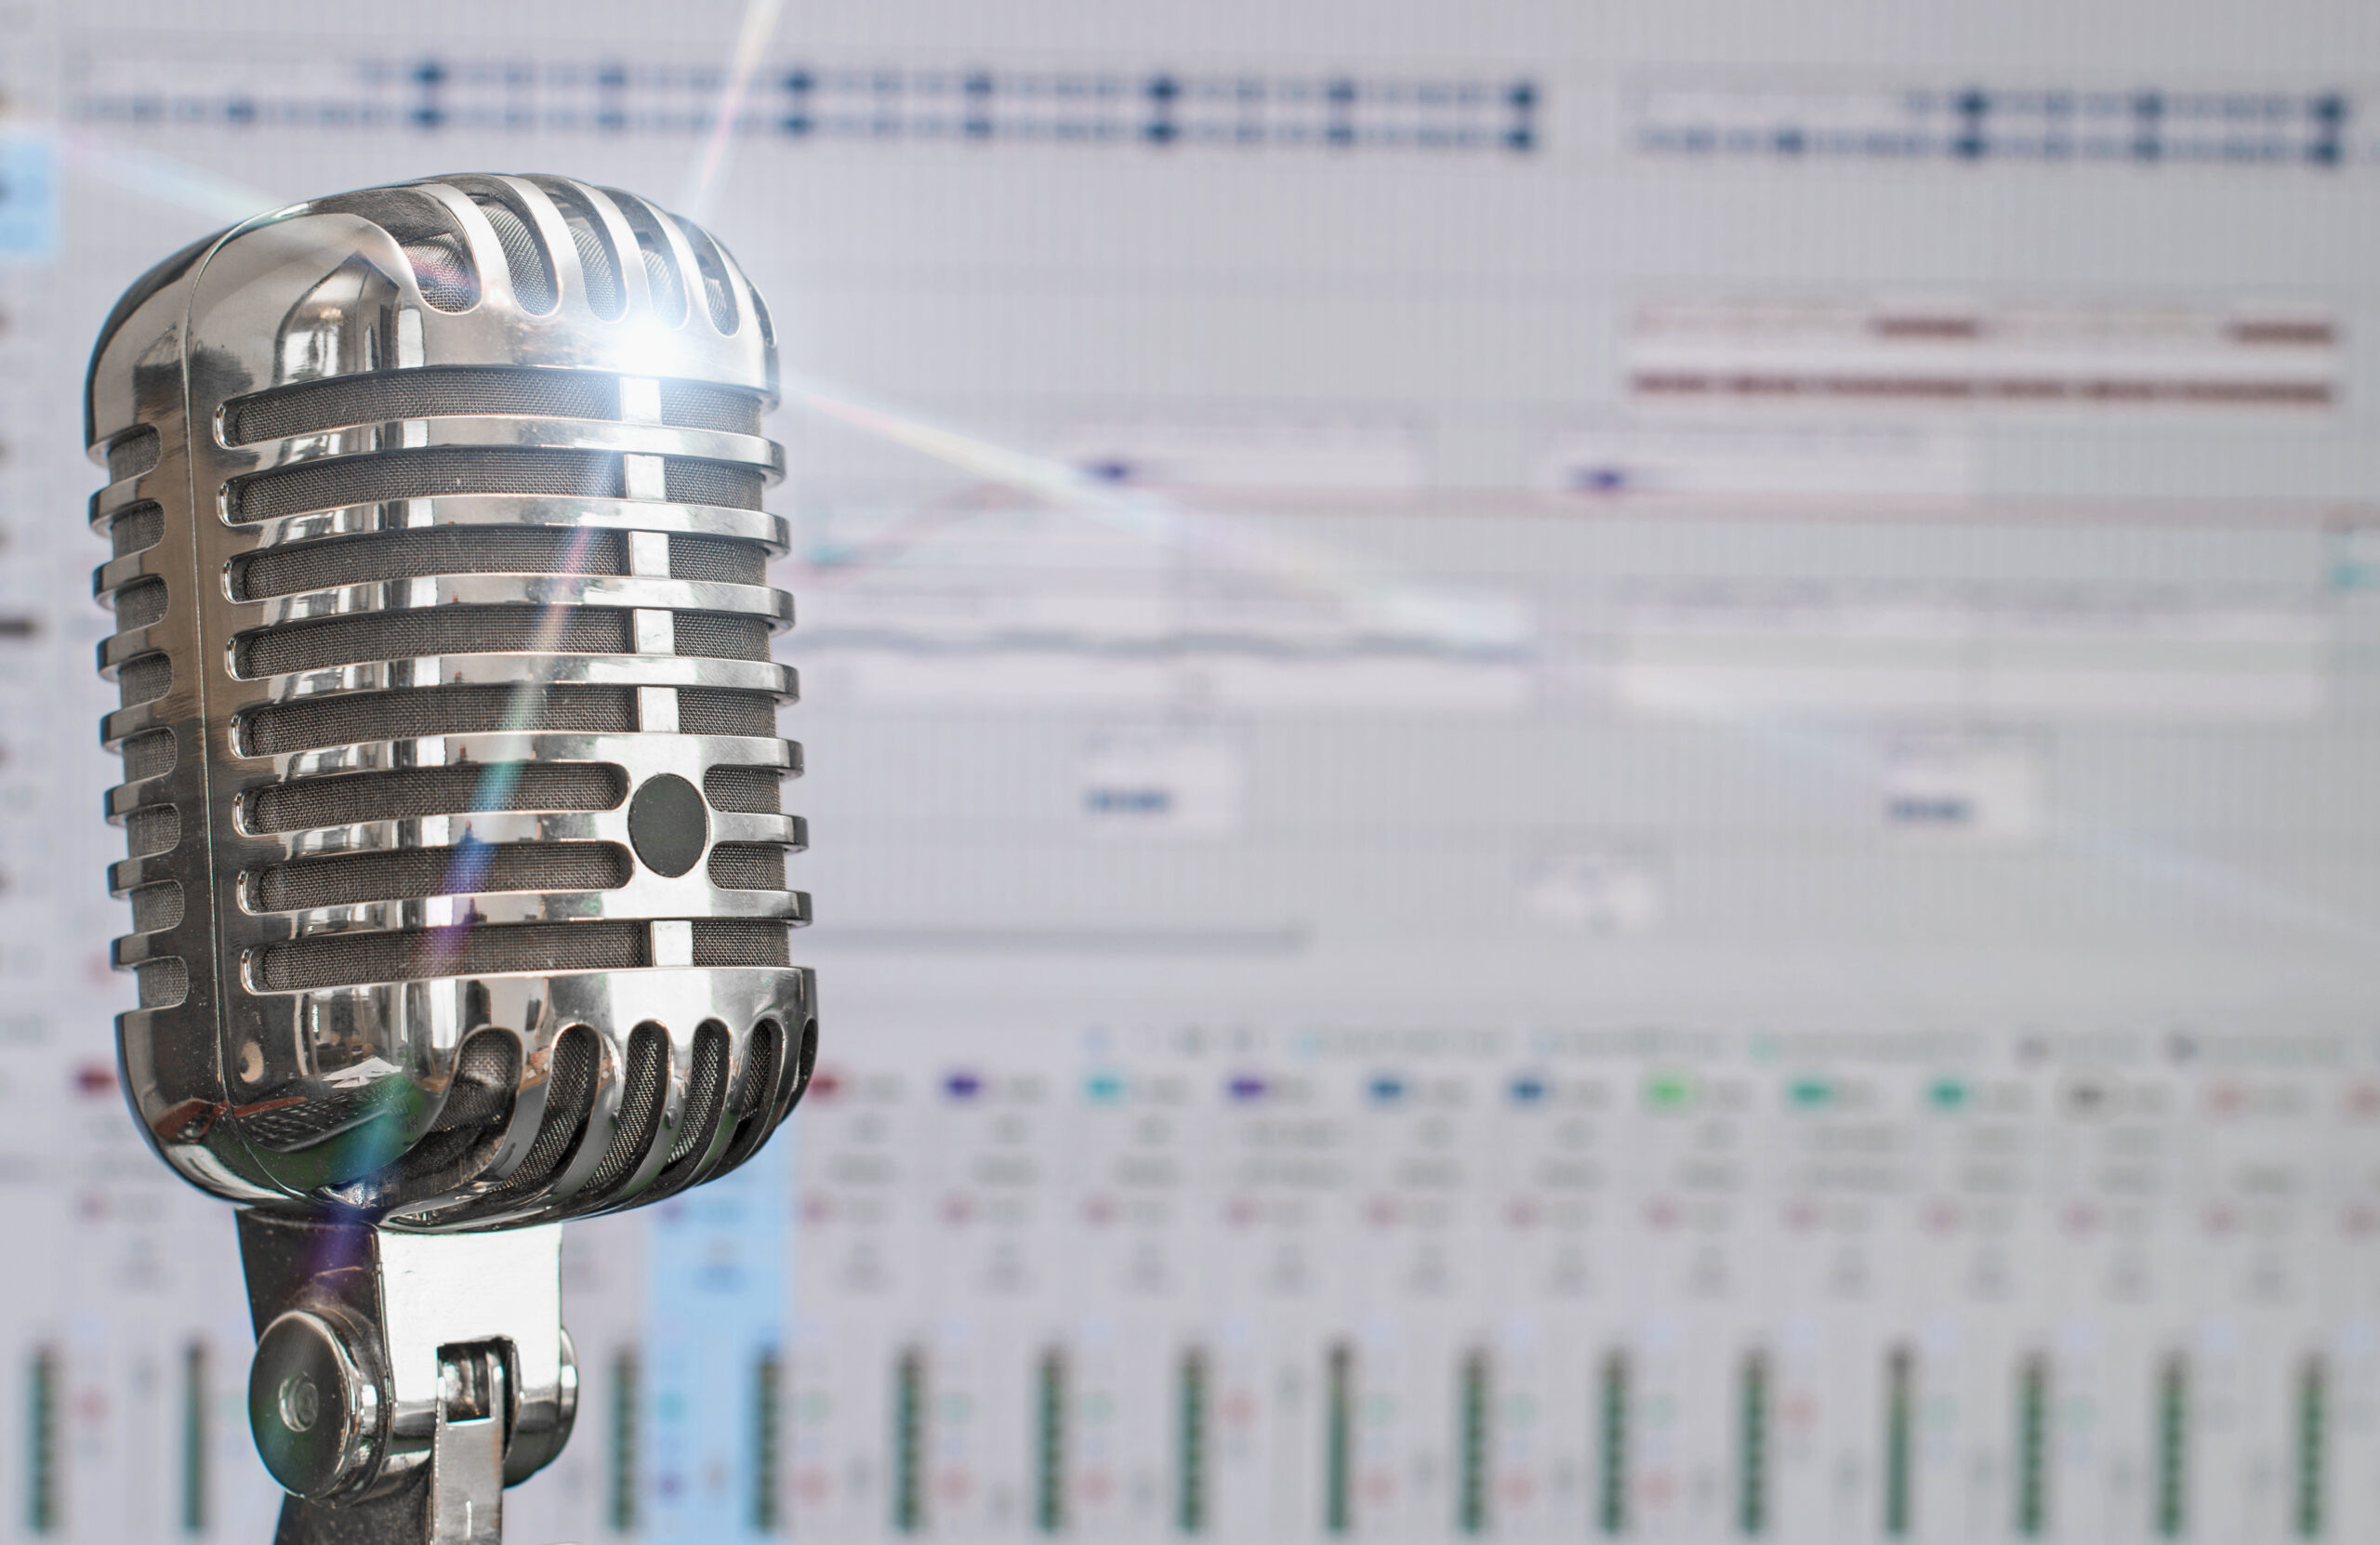 Retro microphone over recording software background.